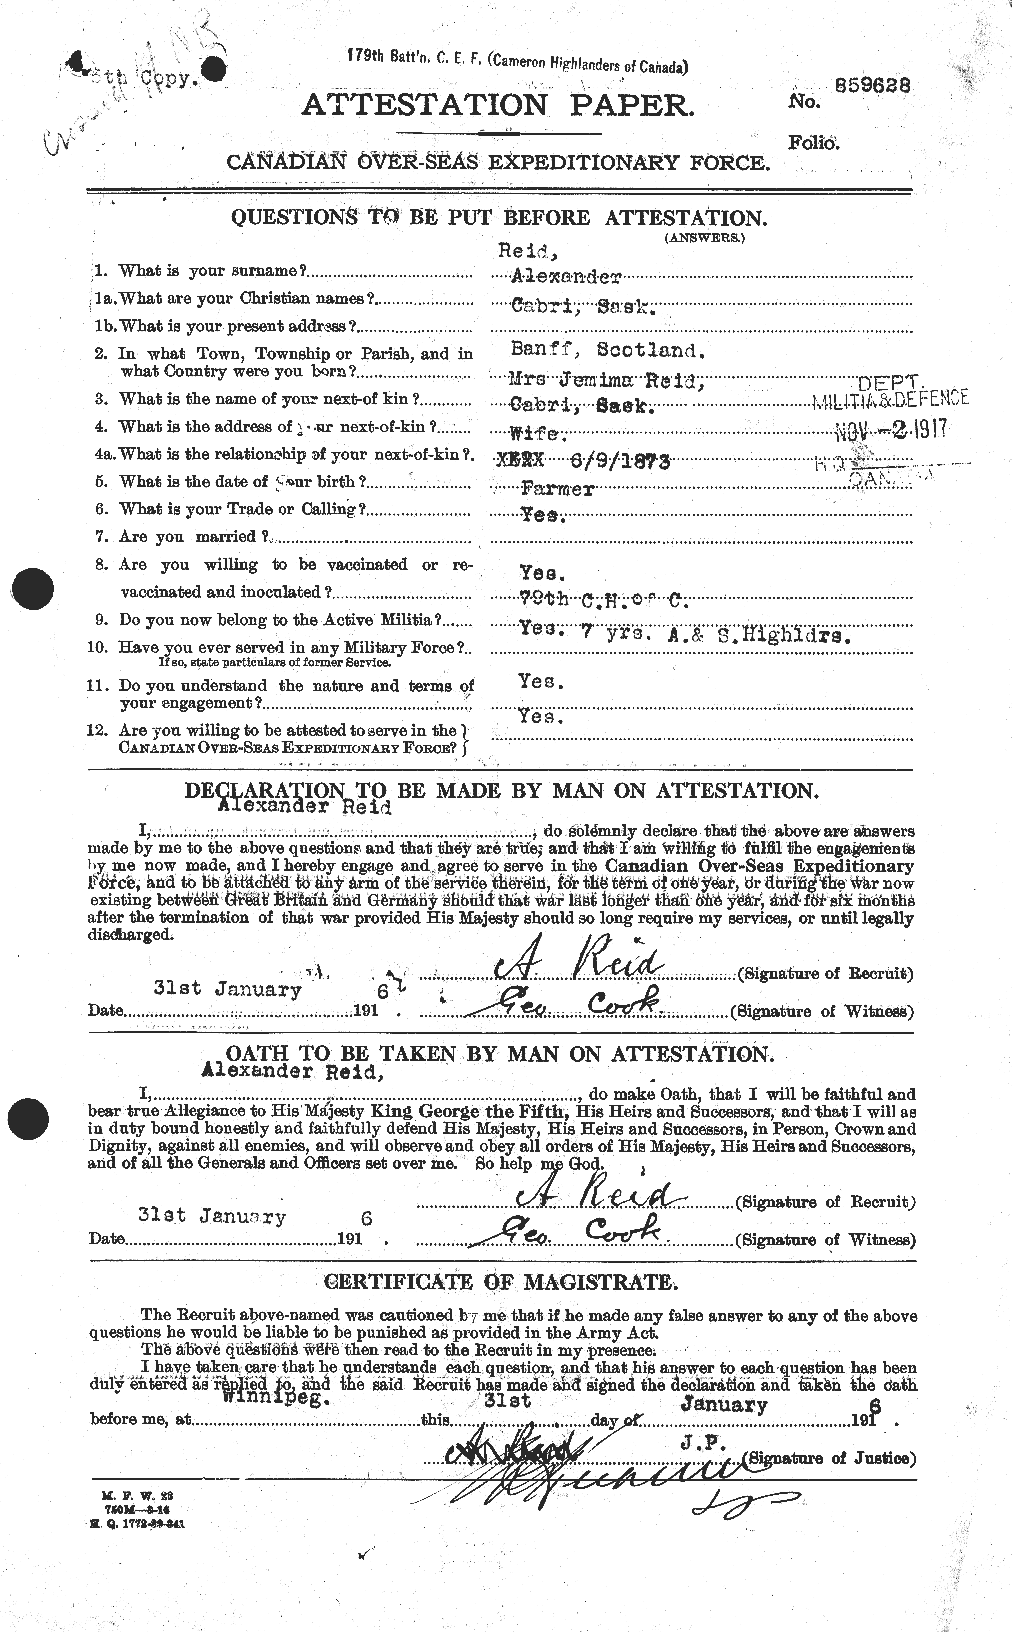 Personnel Records of the First World War - CEF 597761a